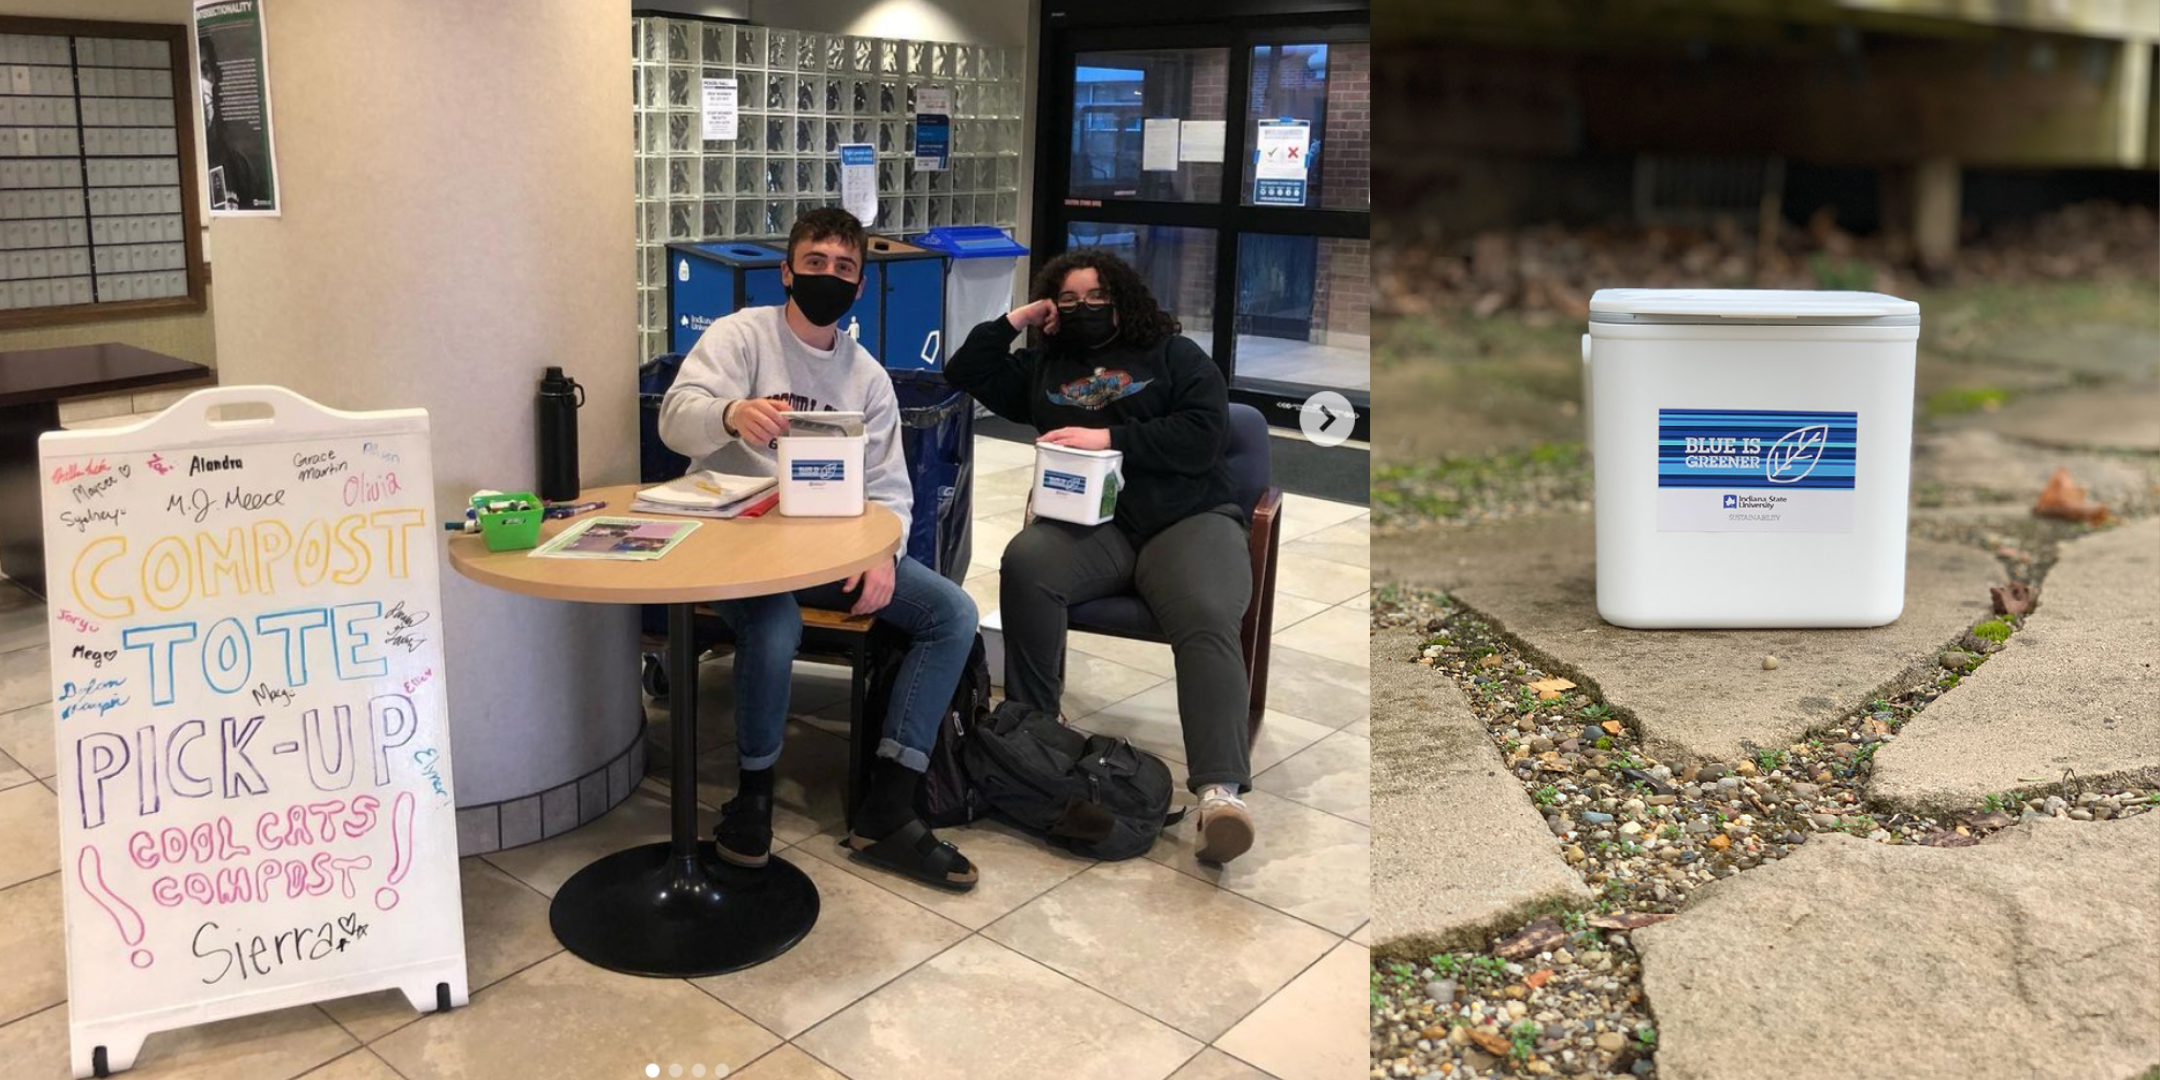 Image on the left is of two students sitting at a table holding individual composting totes and a side beside them that says compost tote pick up. The right image is of a compost tote on the ground with a sticker that says blue is greener